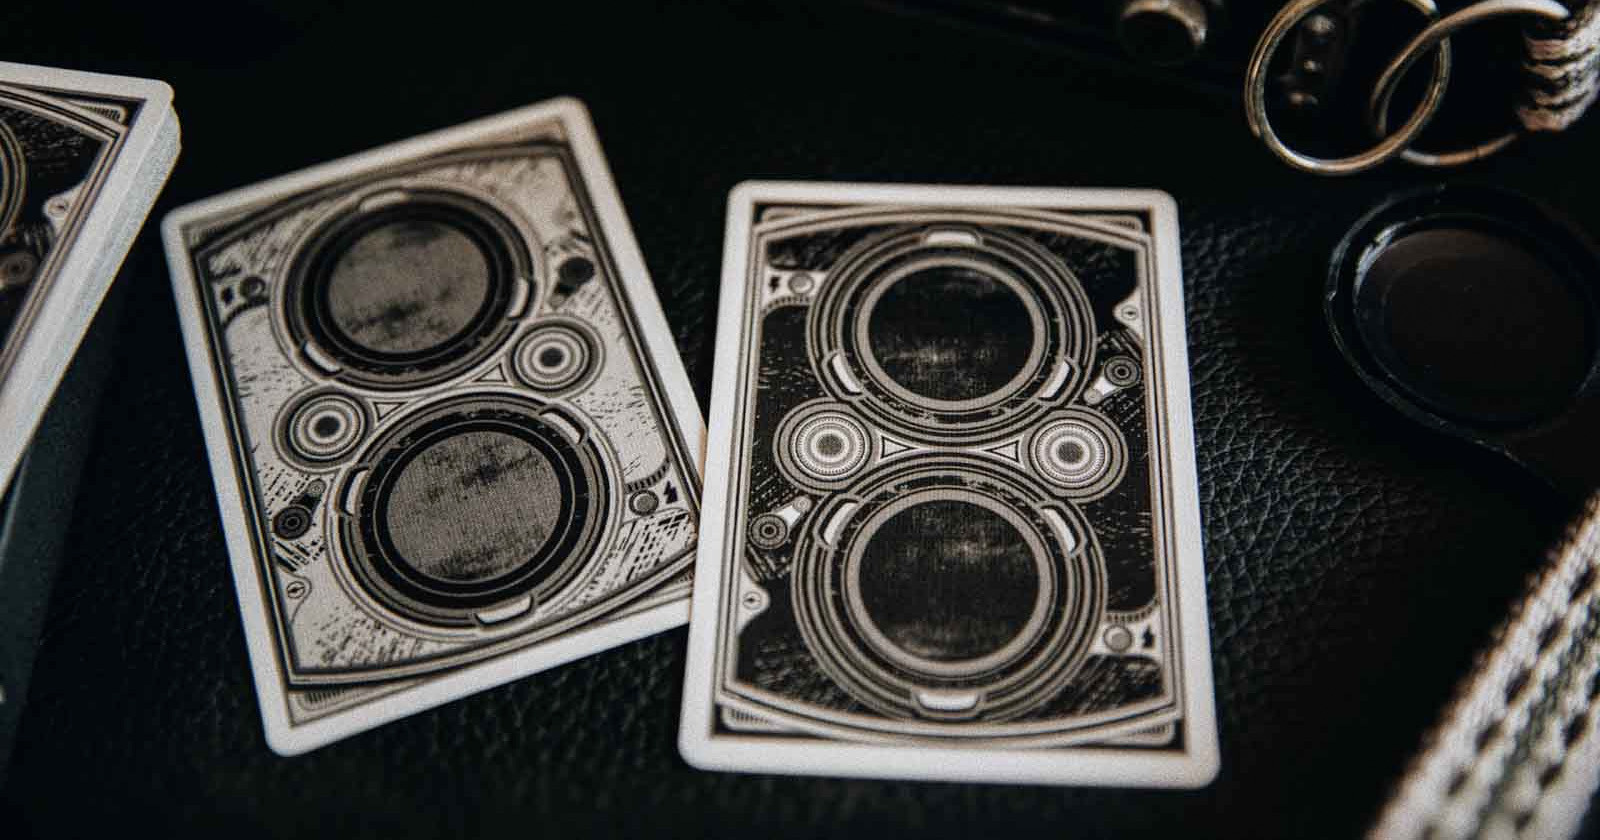 These Vintage Playing Cards are Modeled on the Rolleiflex and Brownie